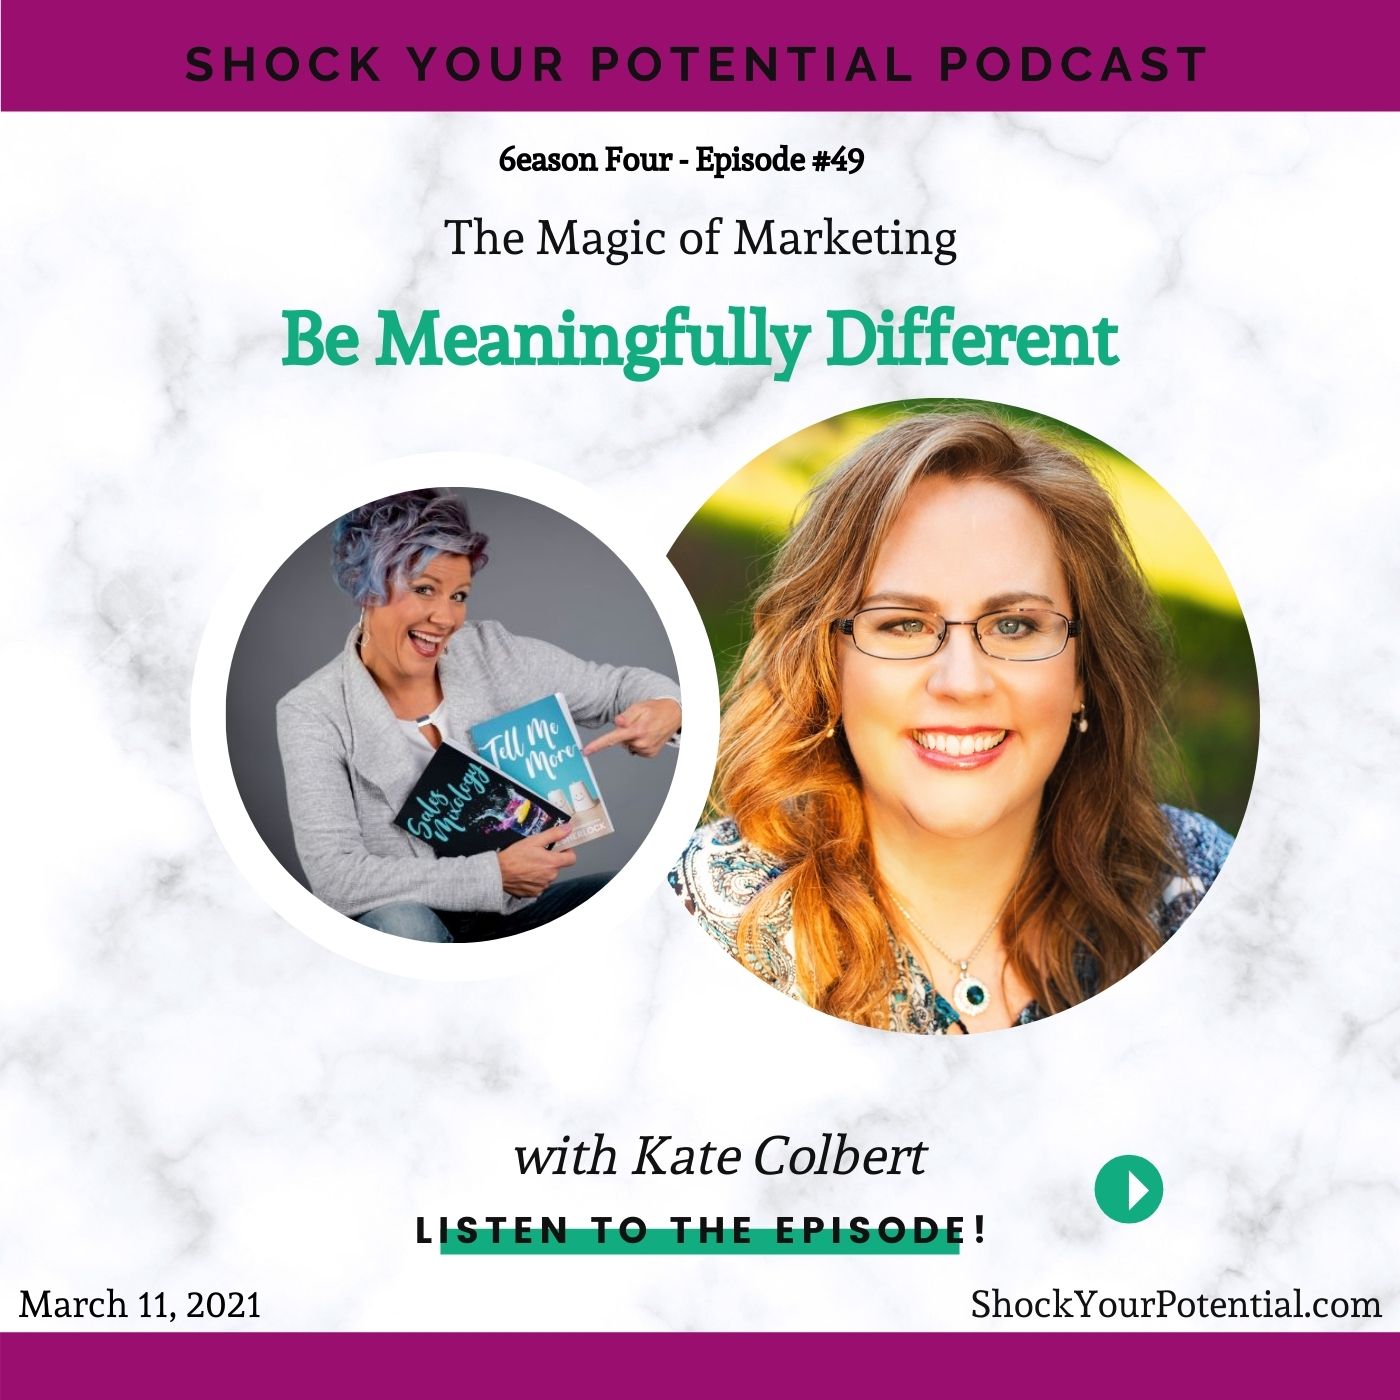 Be Meaningfully Different – Kate Colbert